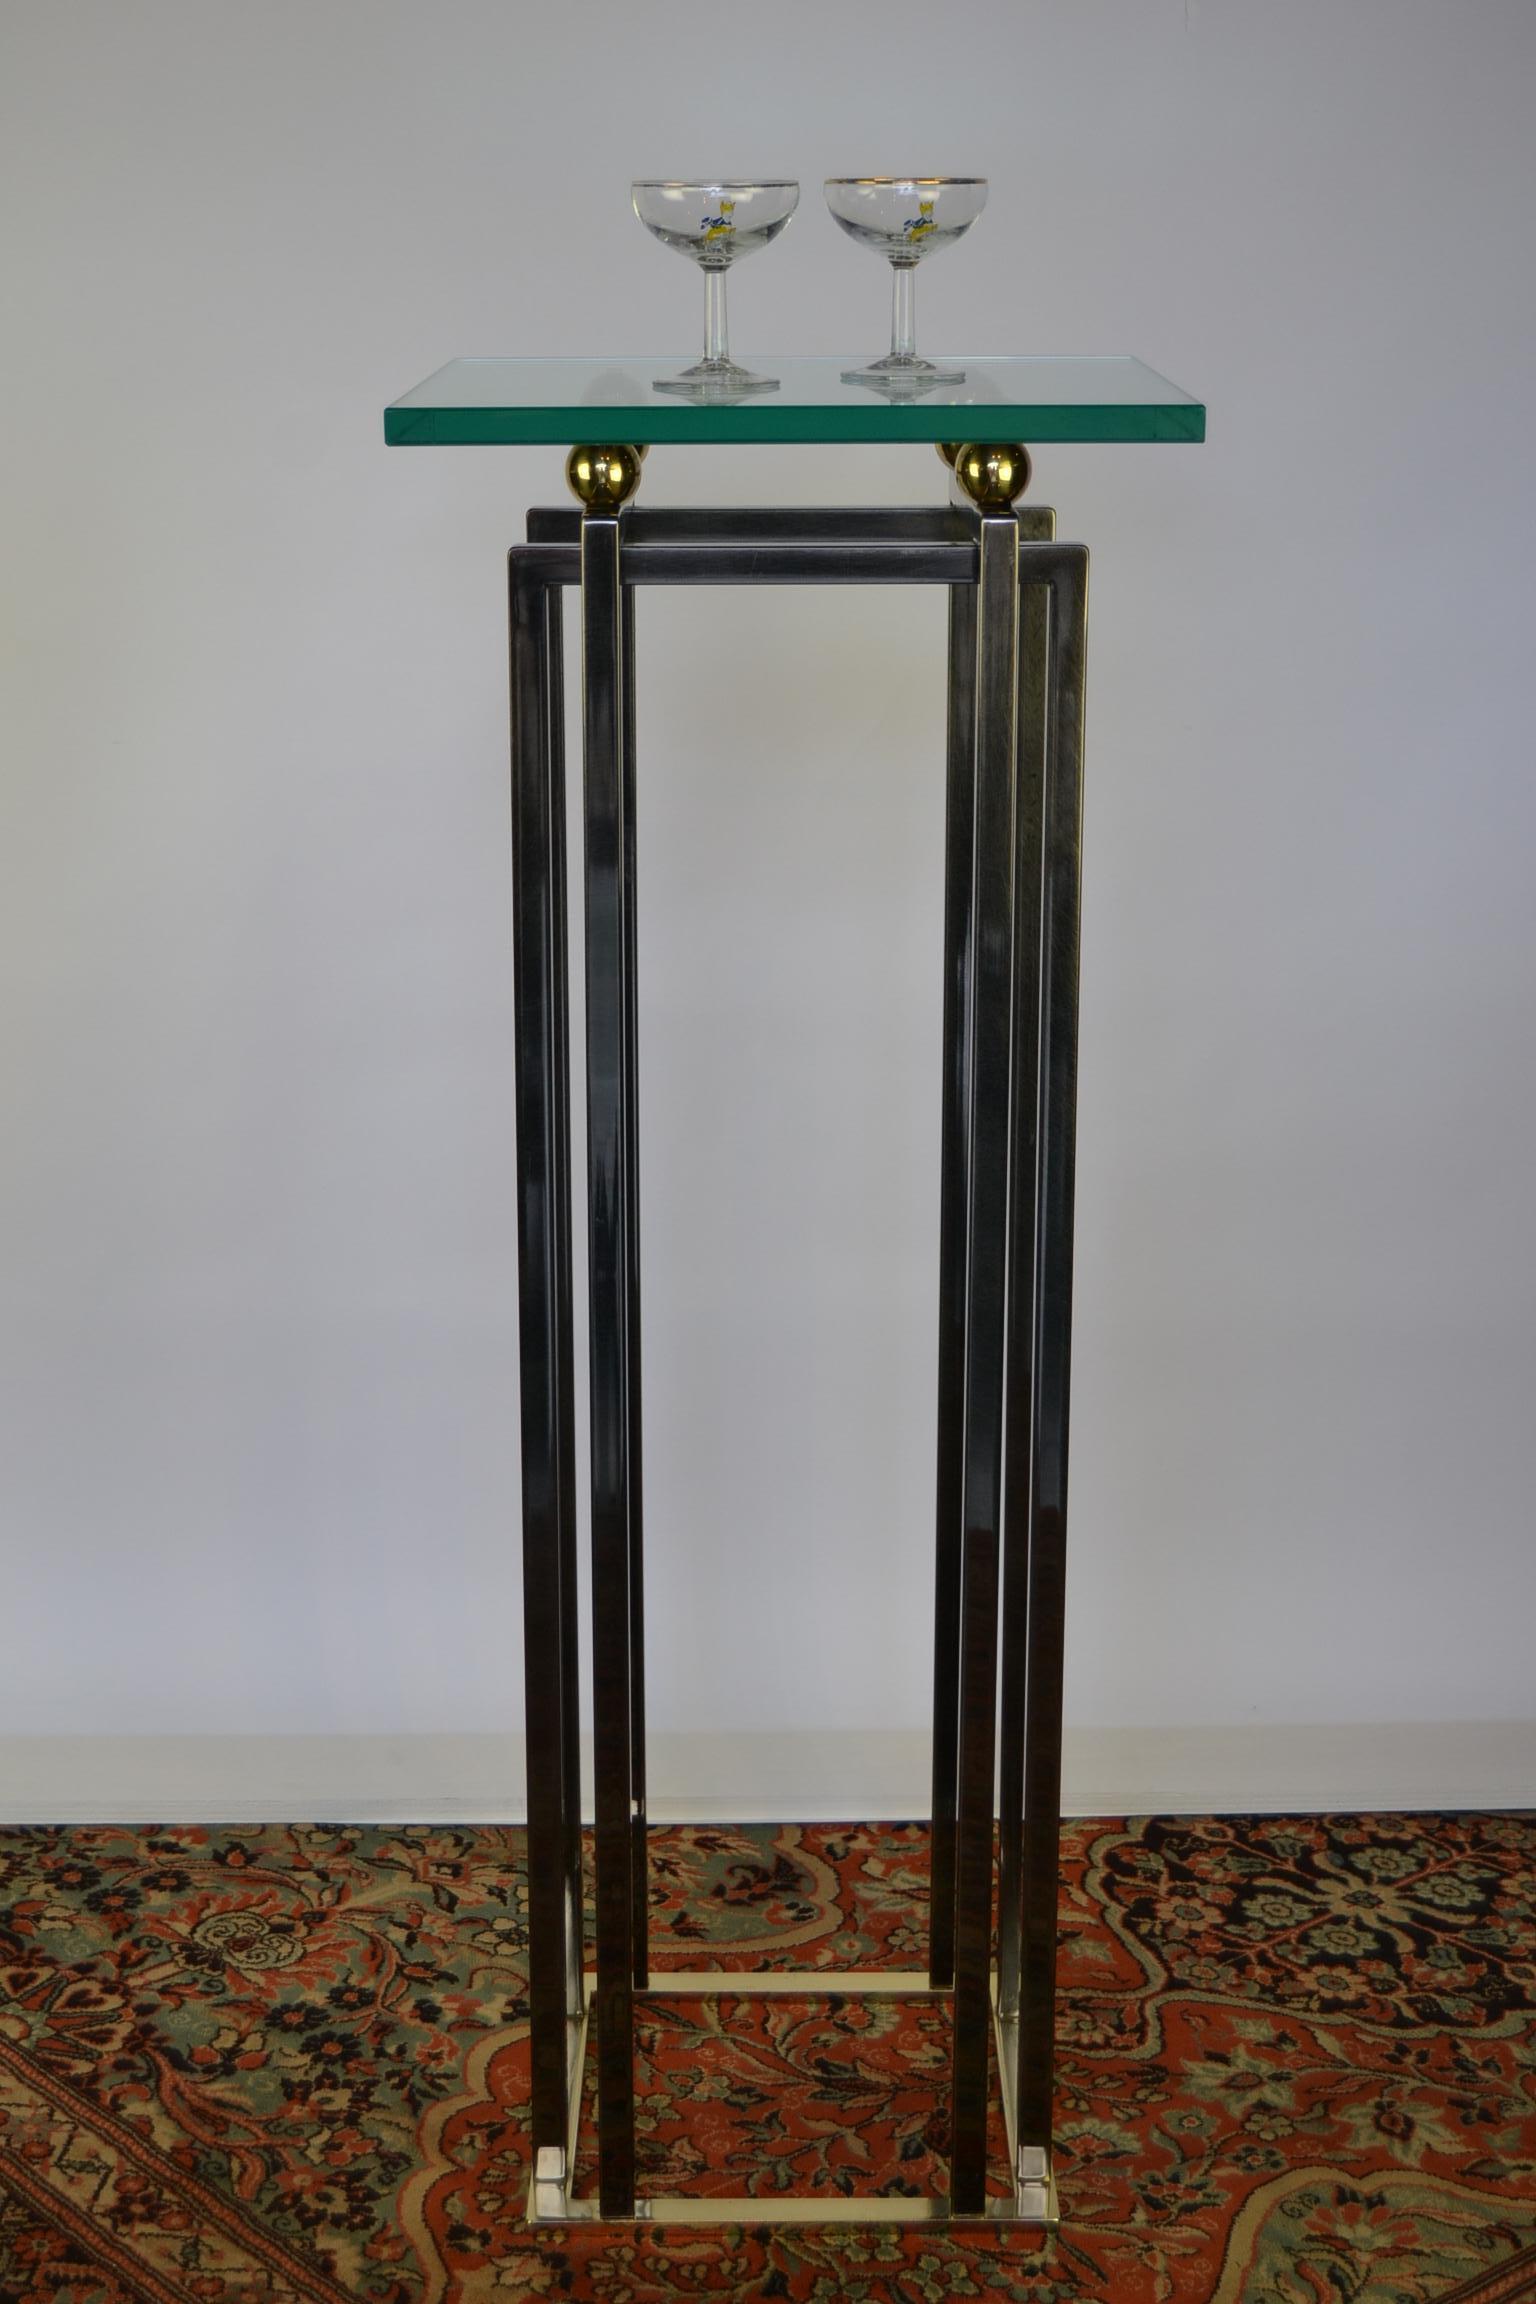 Impressive vintage console table, Pied de Stal, pedestals, model.
Brass and chrome console made by the Belgian Company Belgo Chrome in the 1980s. With original thick glass tablet.

Good used condition. 
Has scratches on glass and console.